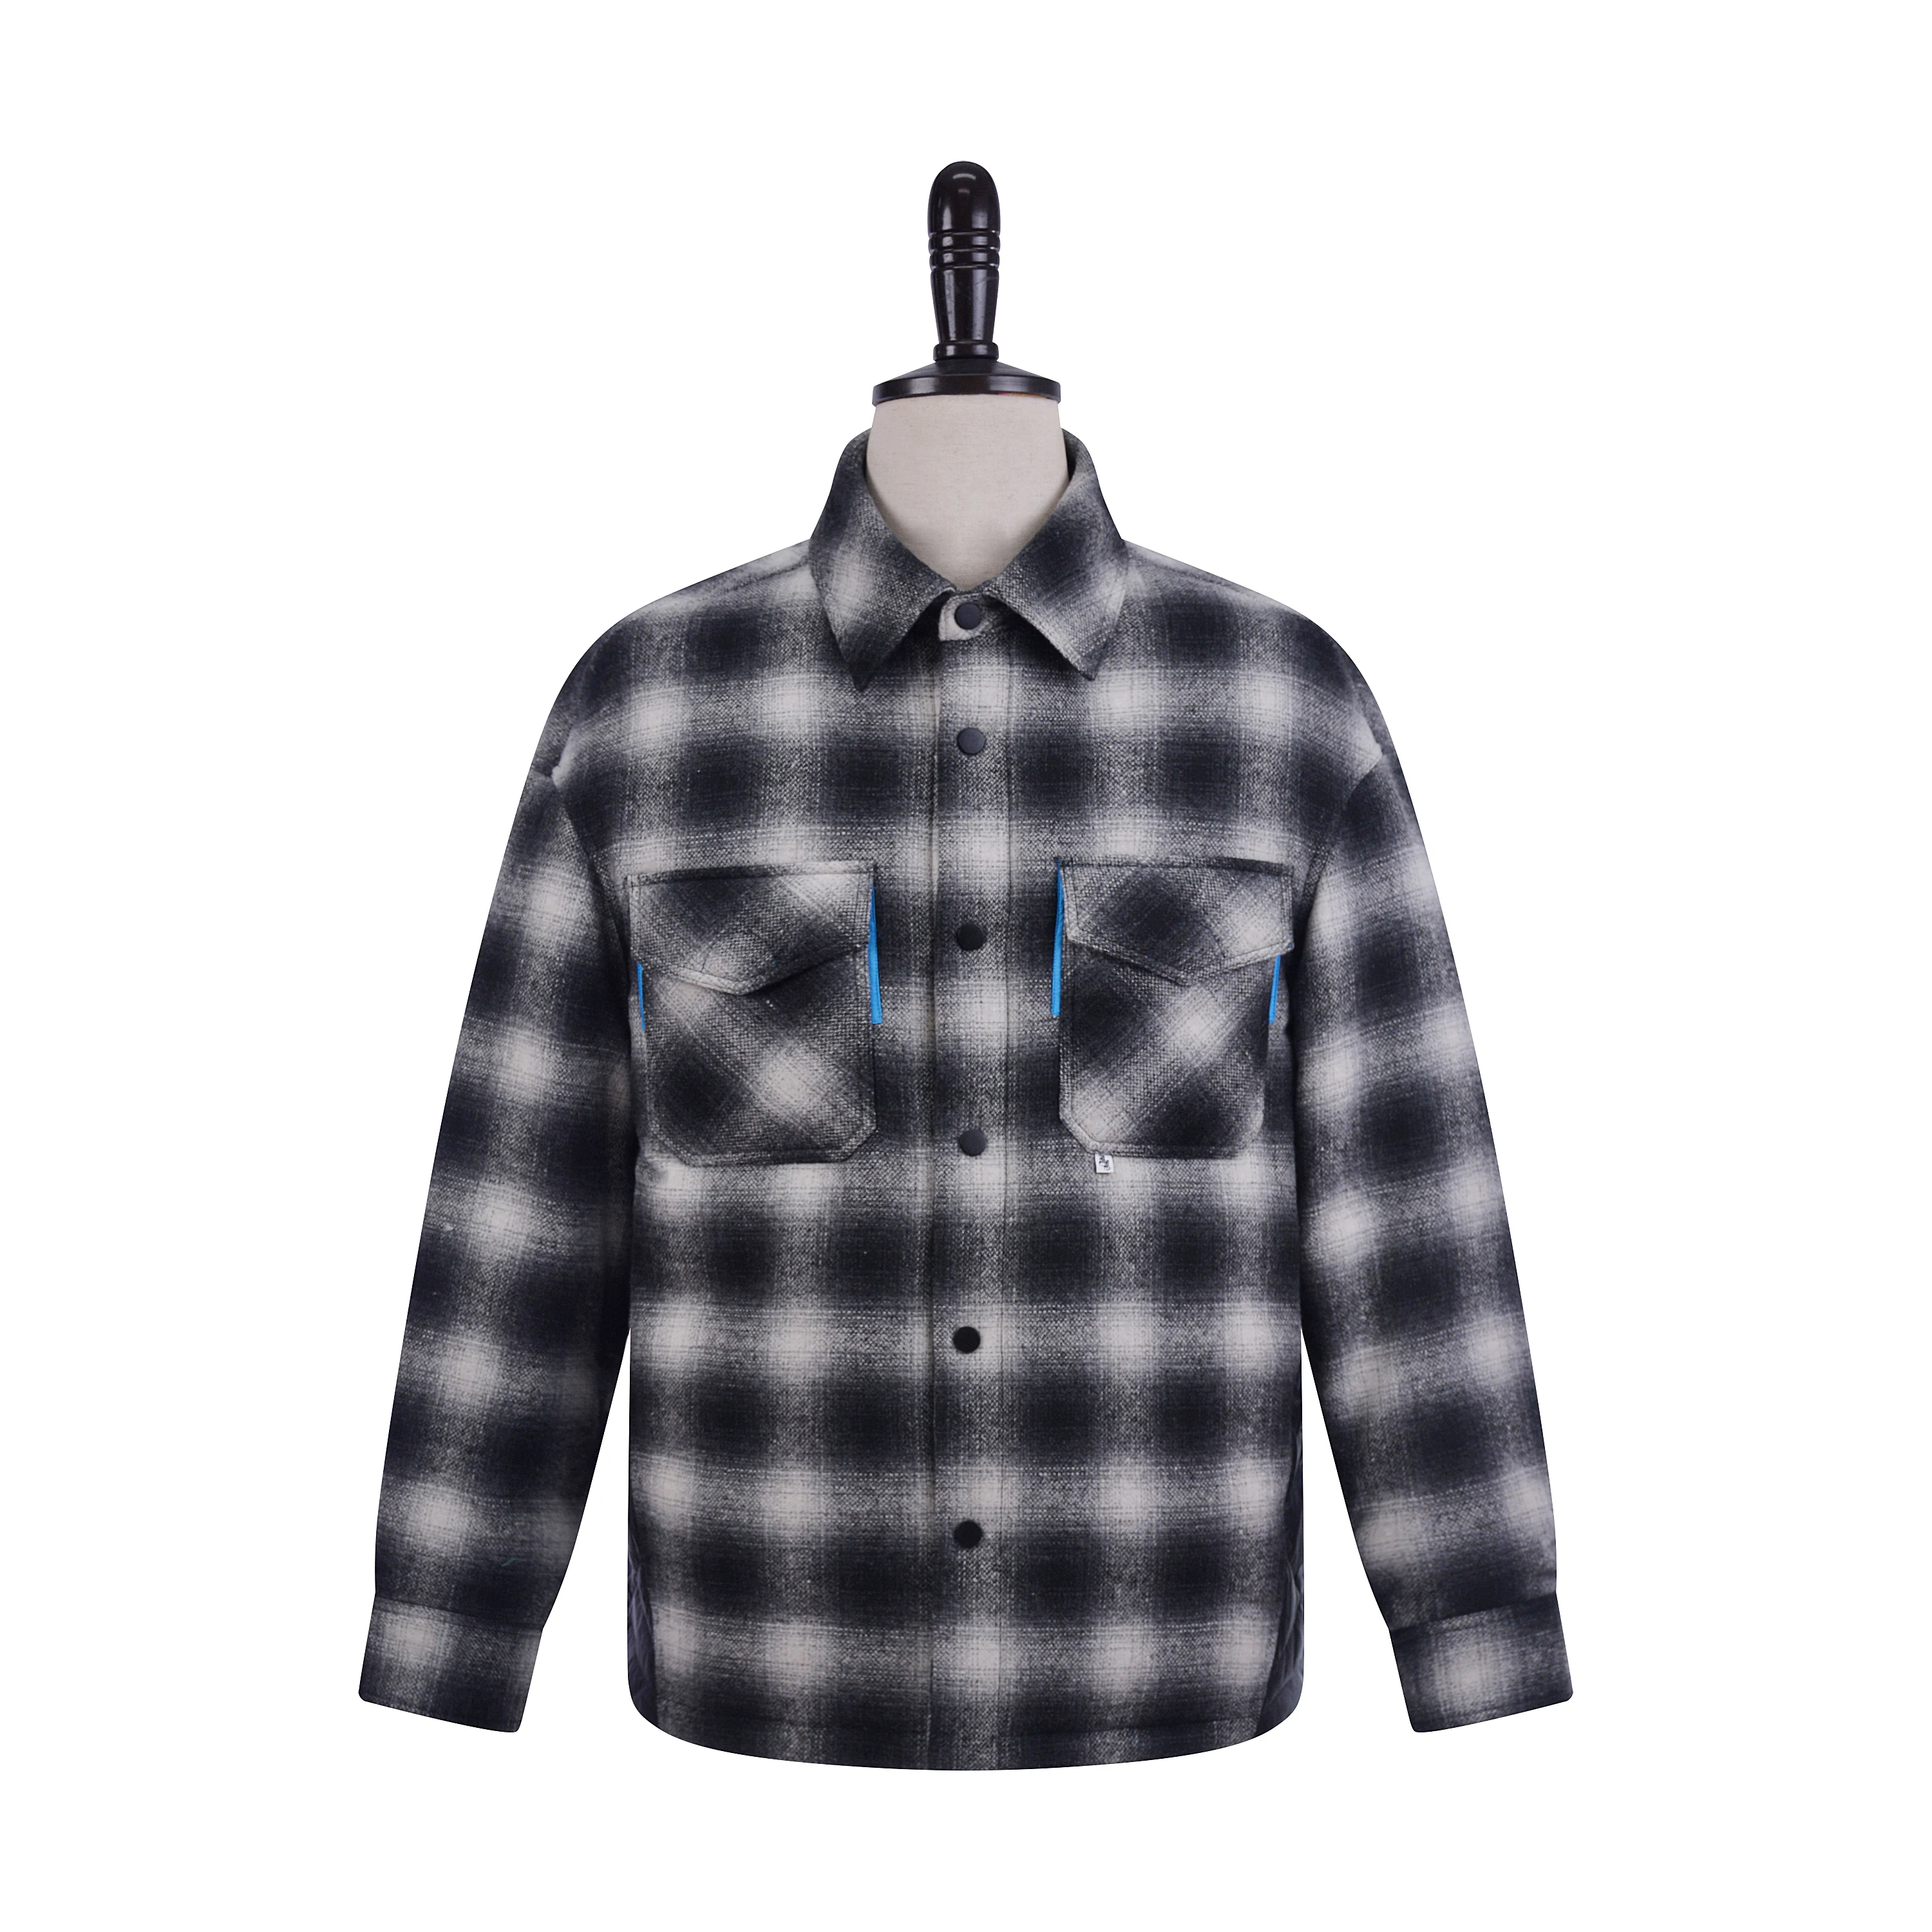 Custom OEM lightweight Turn-down Collar windproof plaid embroidered men's puffer jacket for autumn winter